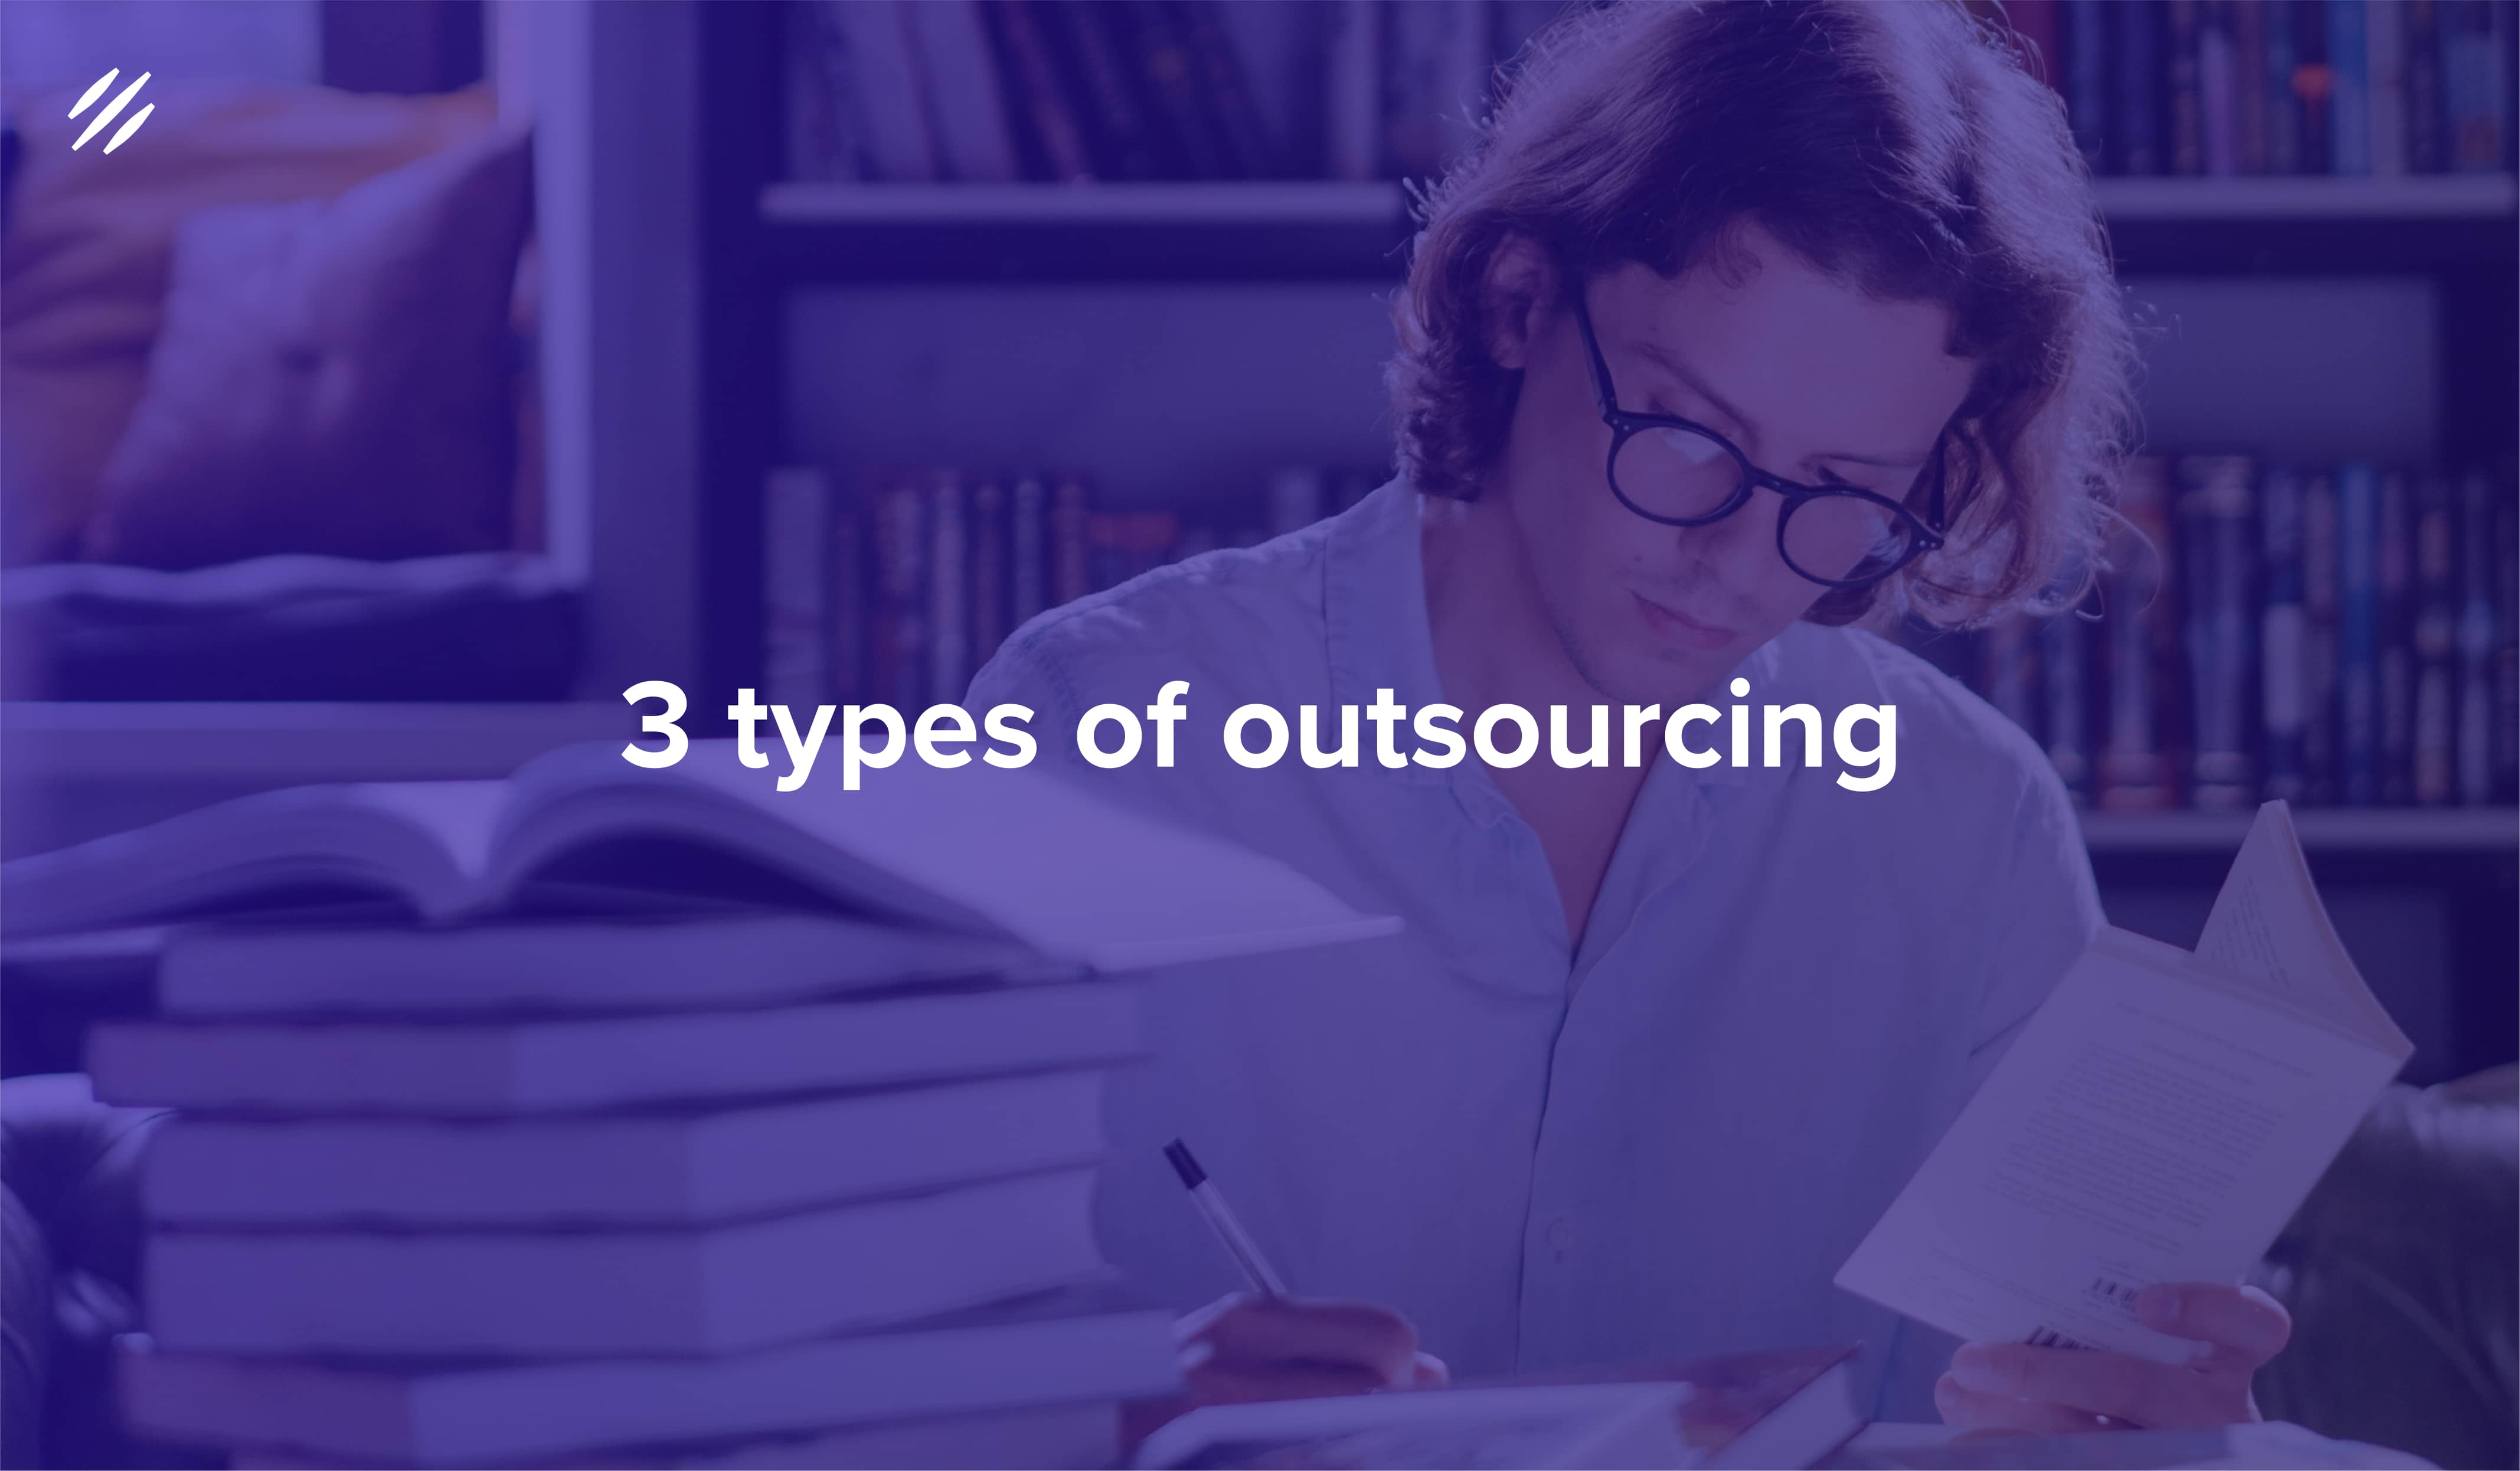 Understanding the Difference Between Nearshoring, Offshoring, and Outsourcing